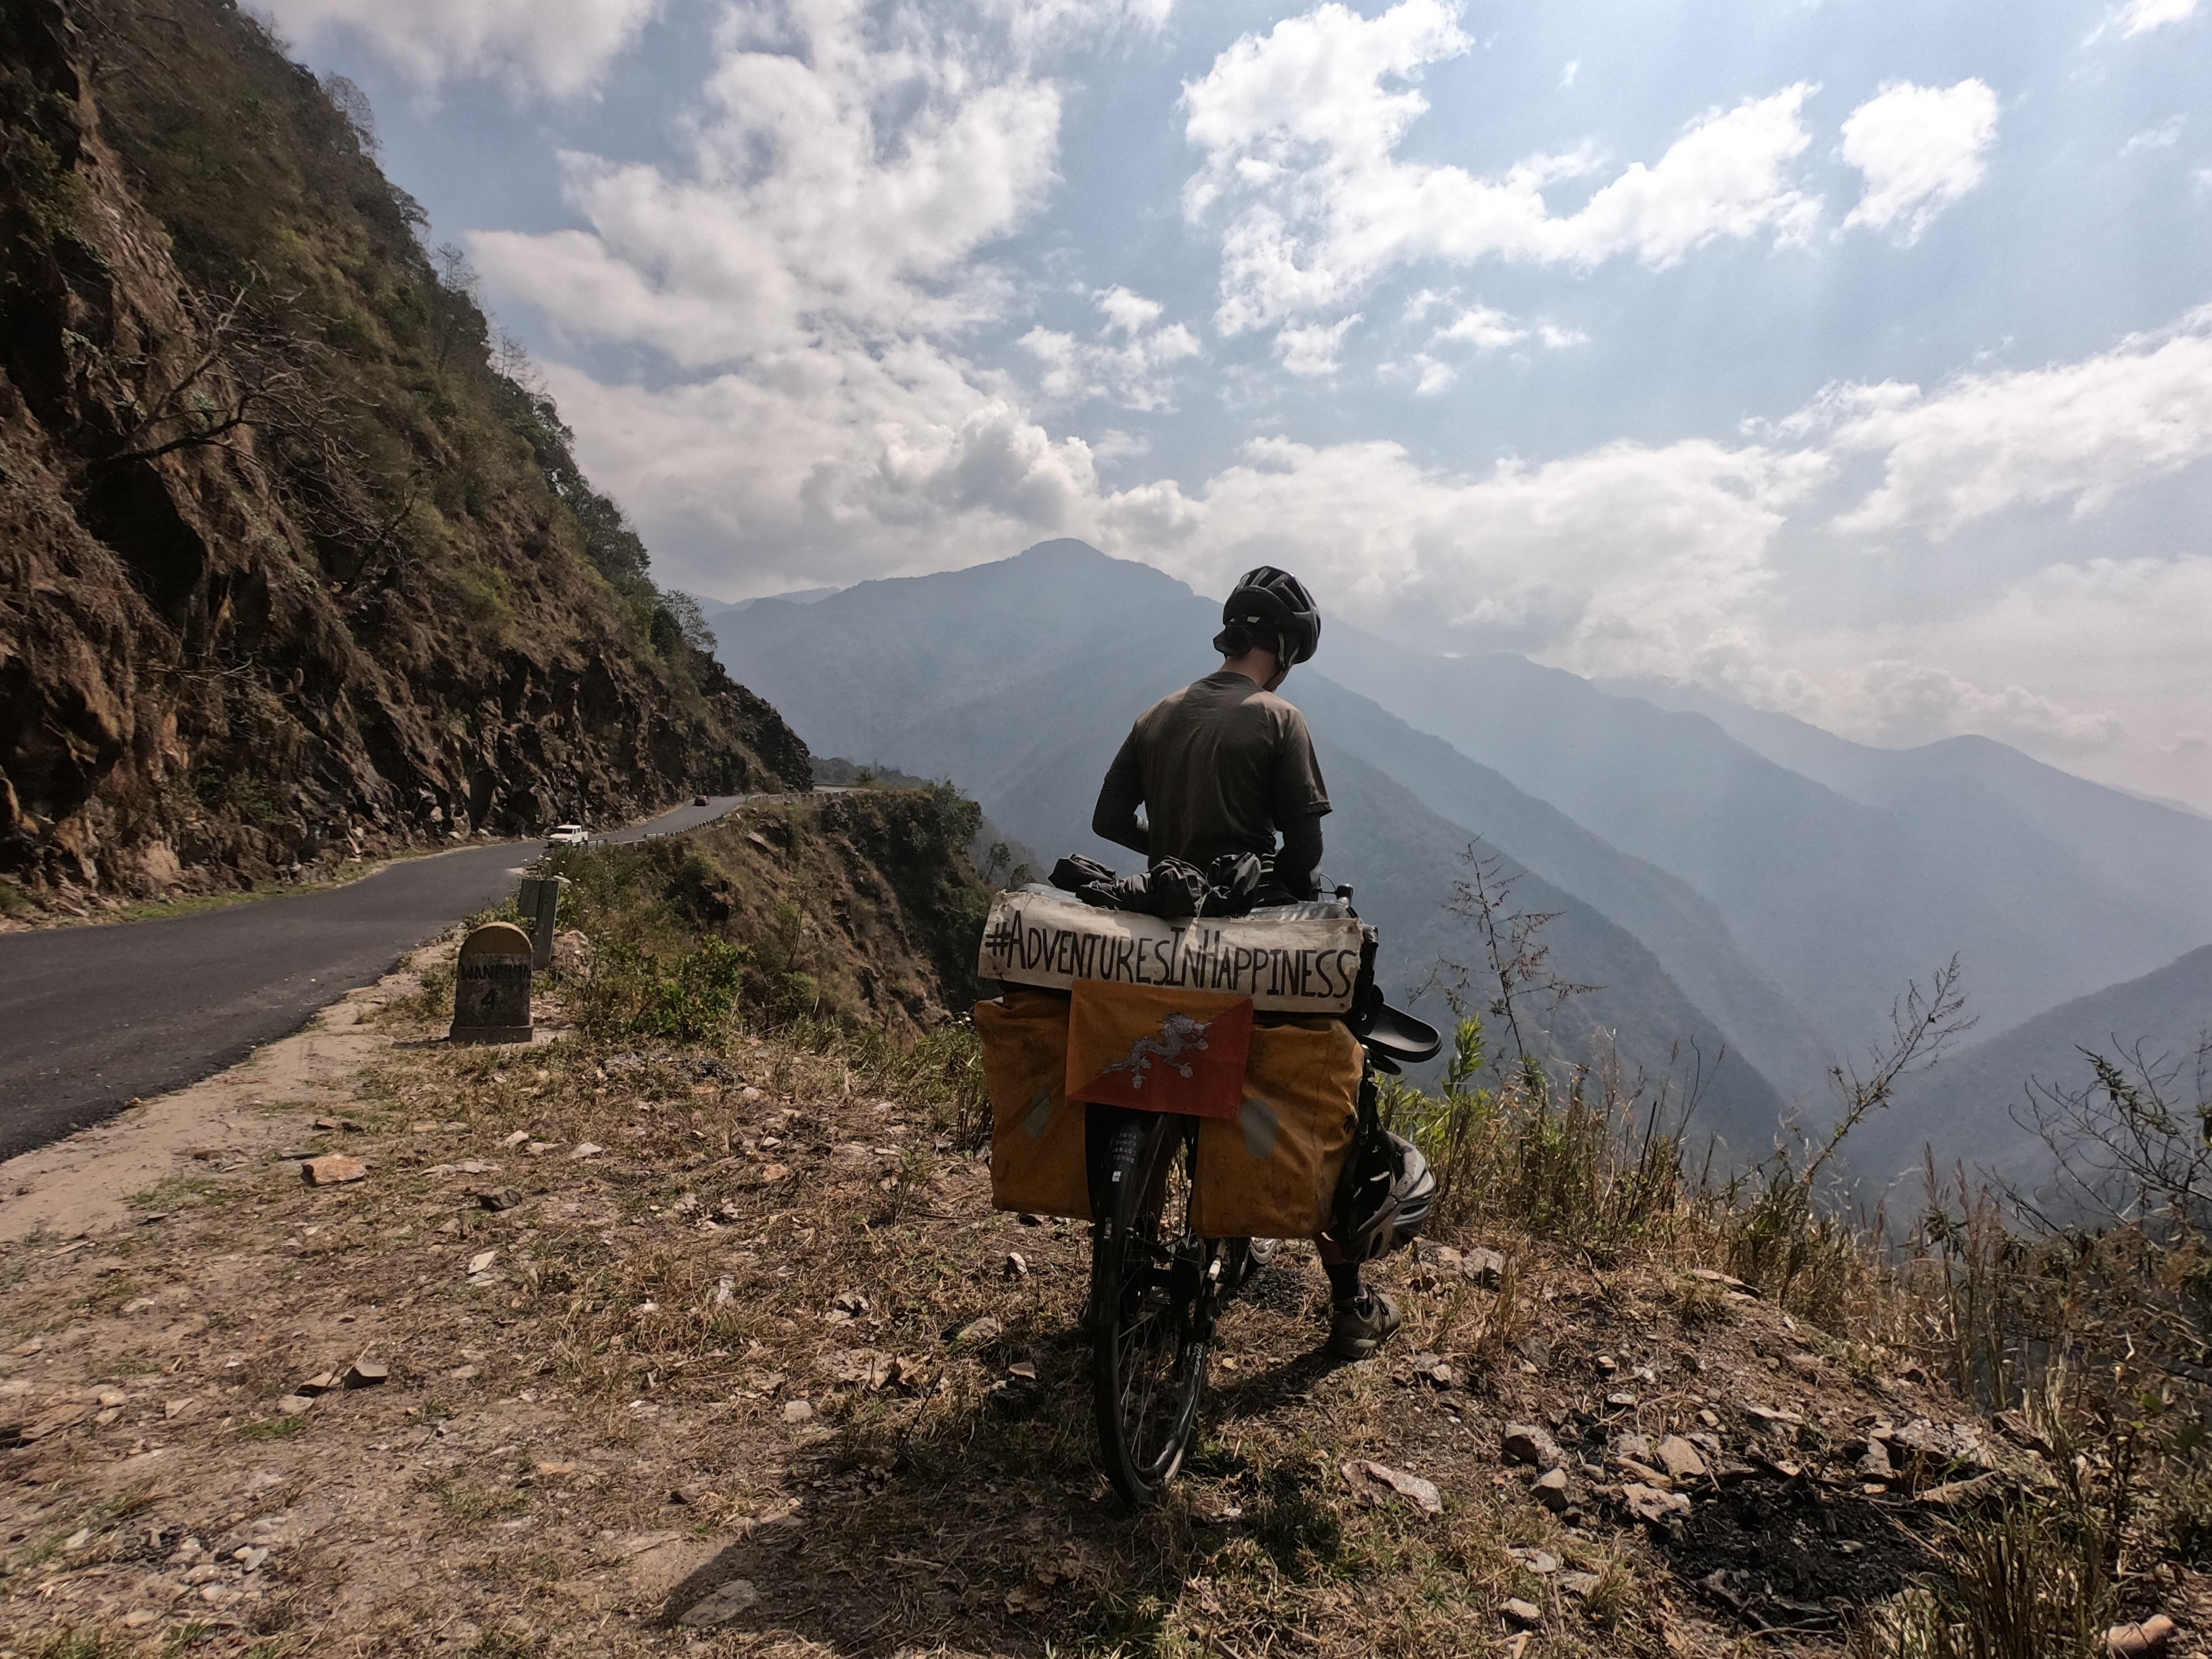 Happiness is a road at least 10,000-miles long – from Edinburgh to Bhutan on a bicycle